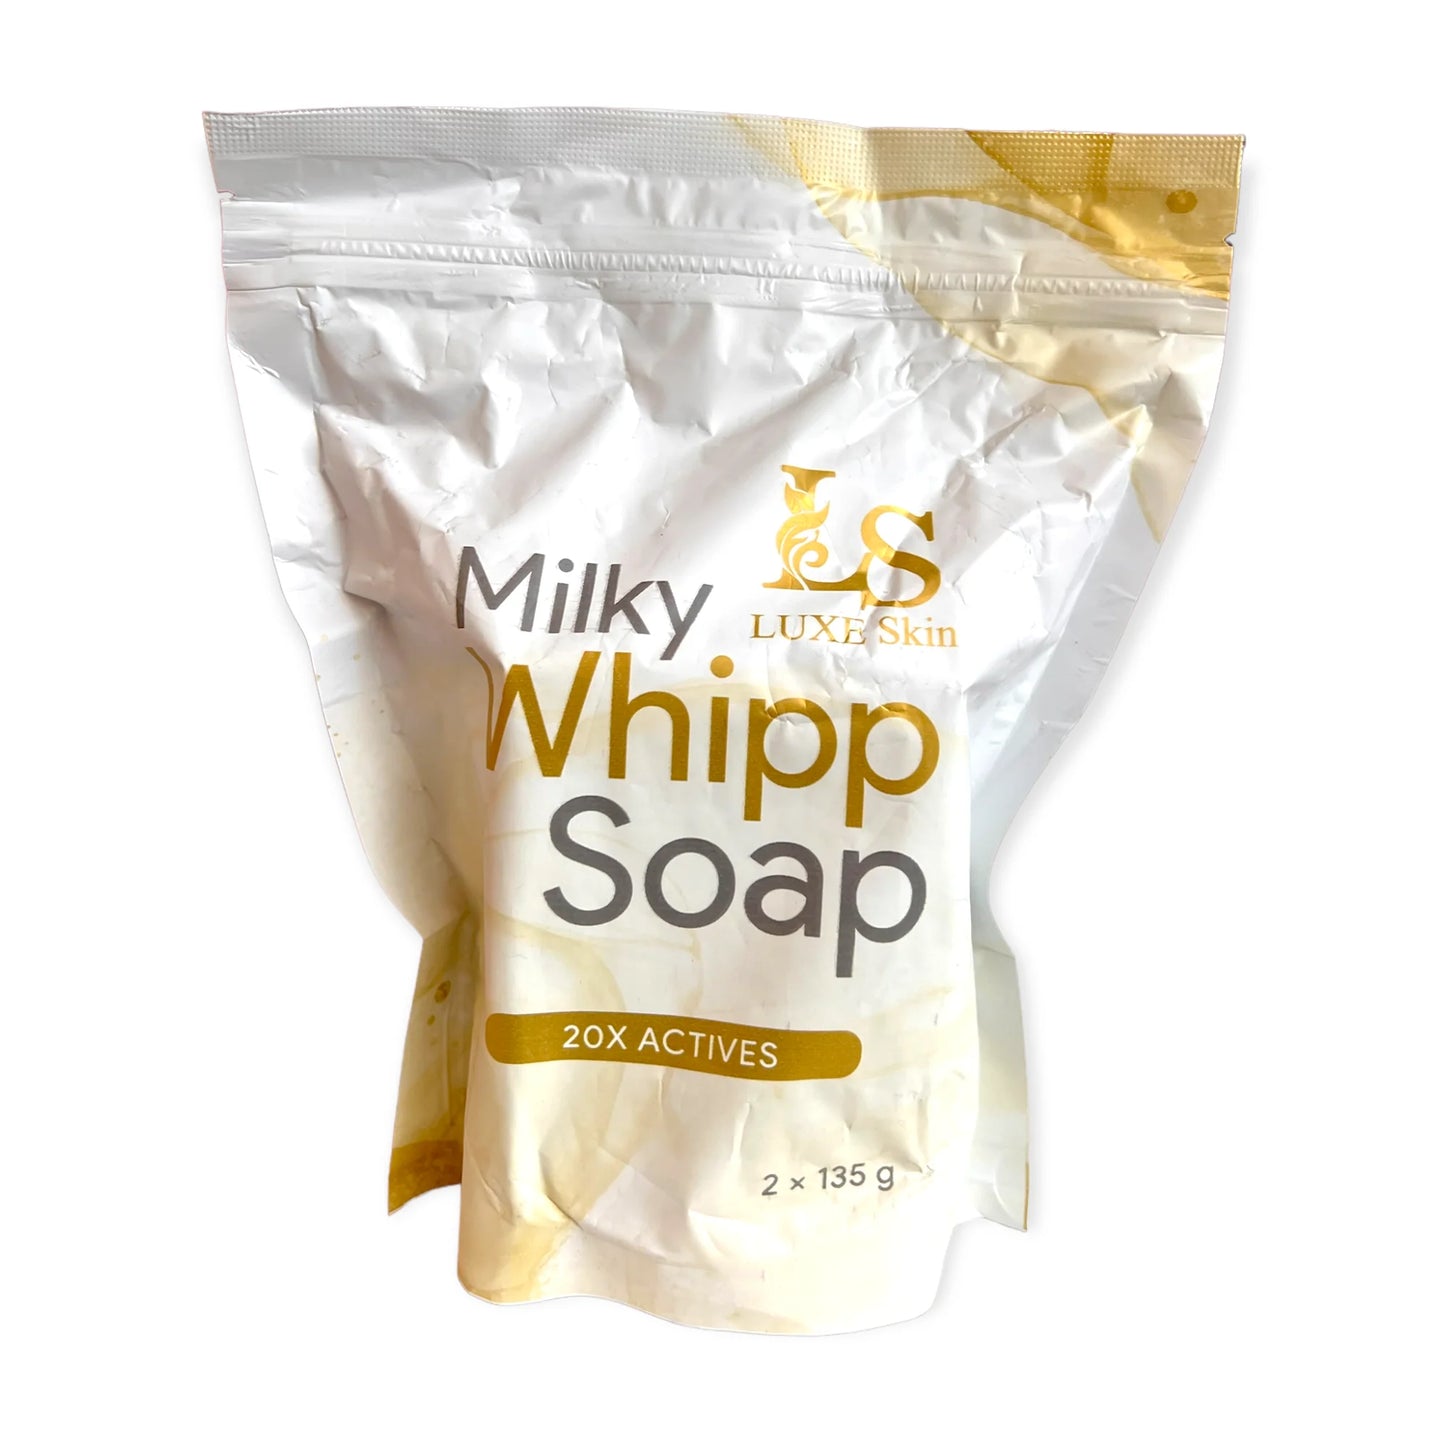 Luxe Skin Milky Whipp Soap with 20 x Actives